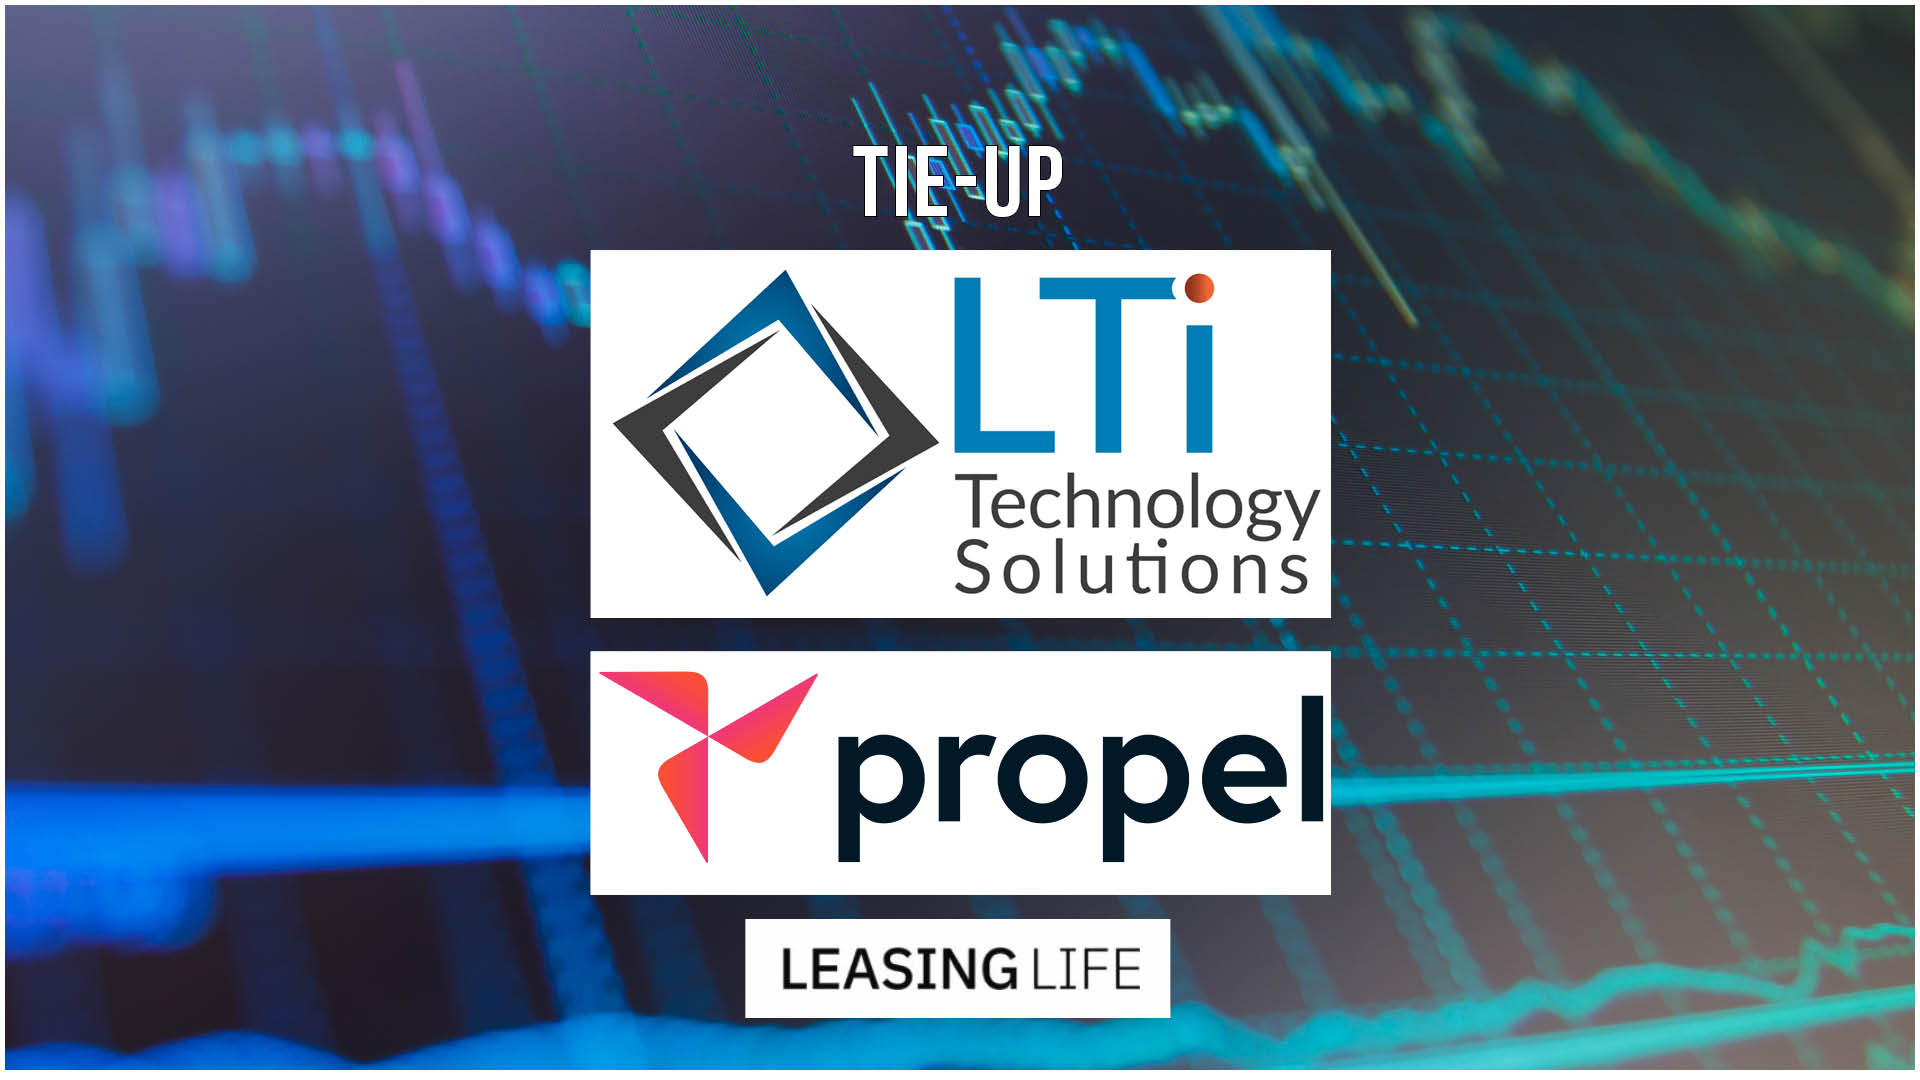 LTi Technology Solutions (LTi) has announced a partnership with Propel, one of the UK’s largest independent finance houses